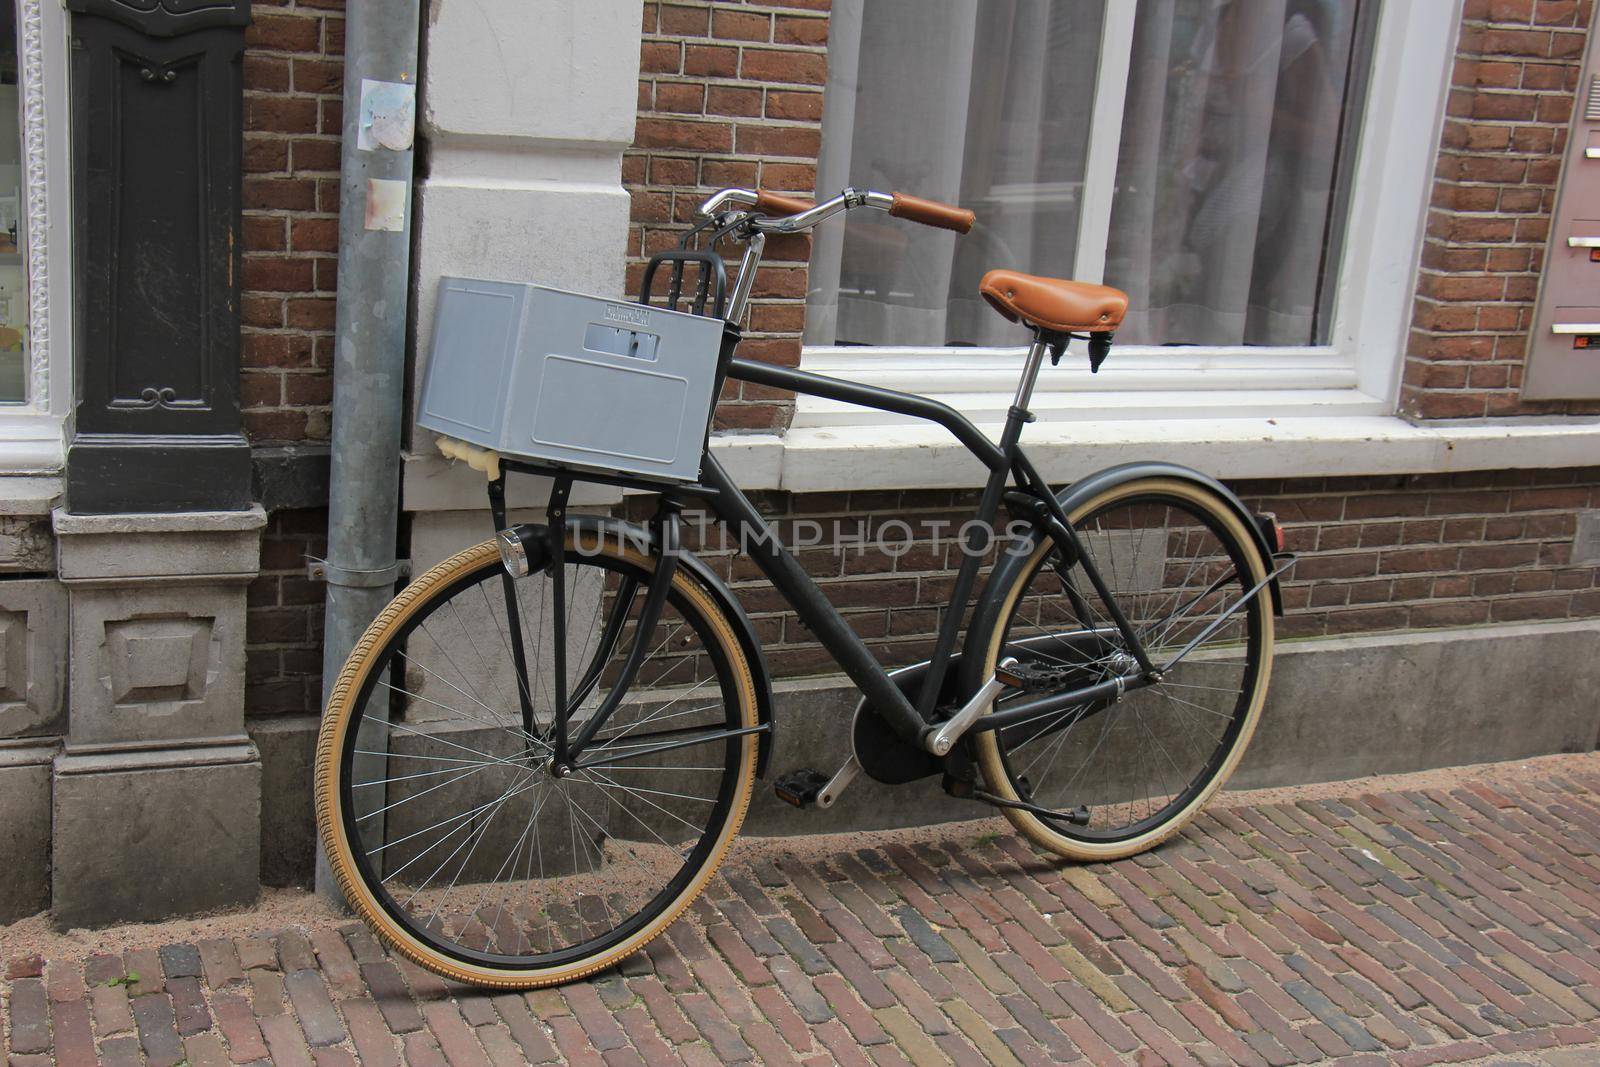 Retro style transportation bike near a brick wall. Plastic beverage crate to carry around the groceries